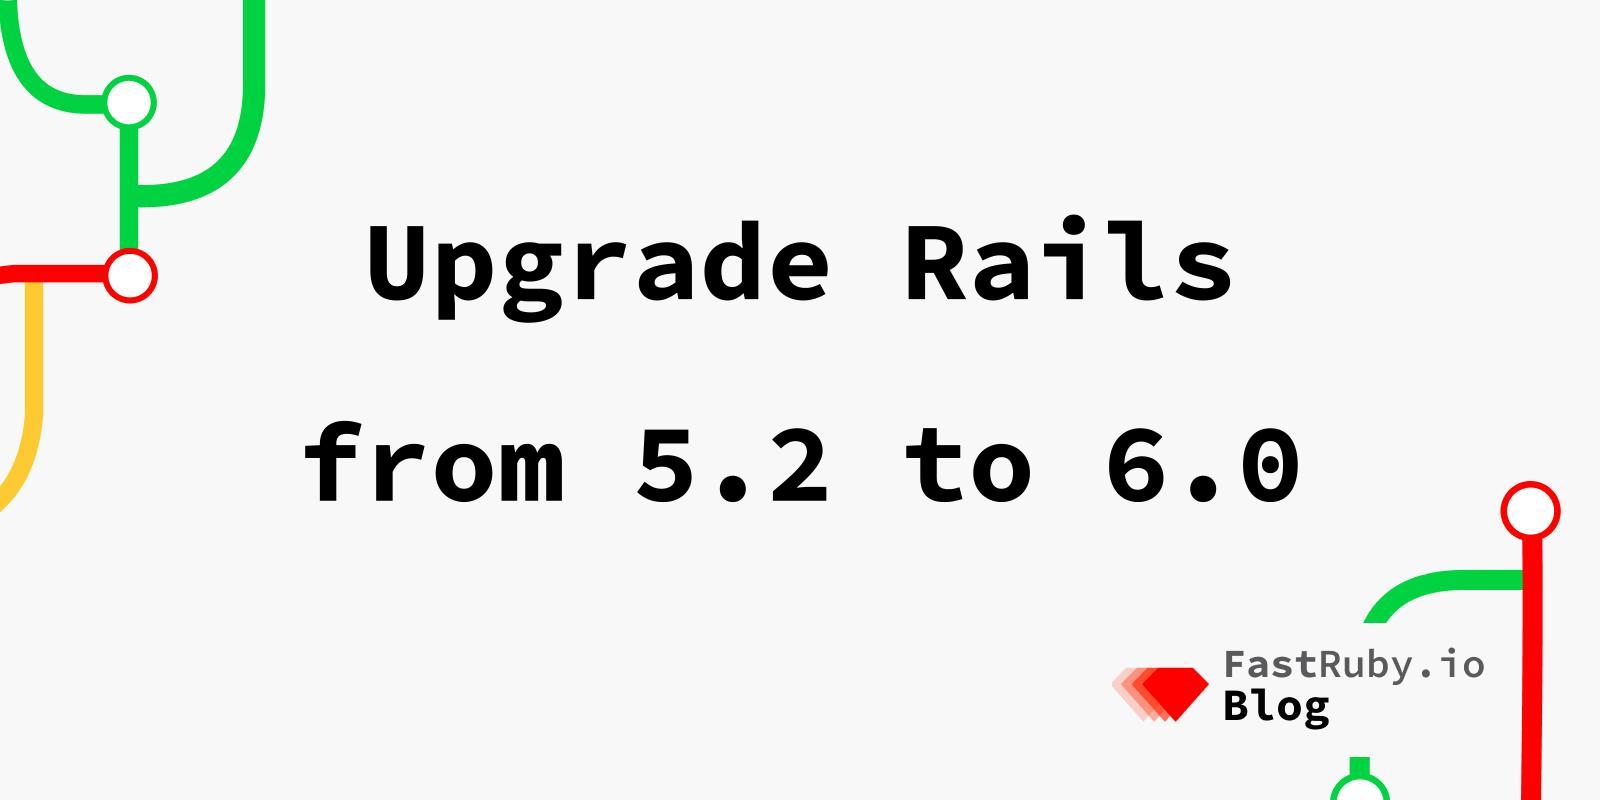 Upgrade Rails from 5.2 to 6.0